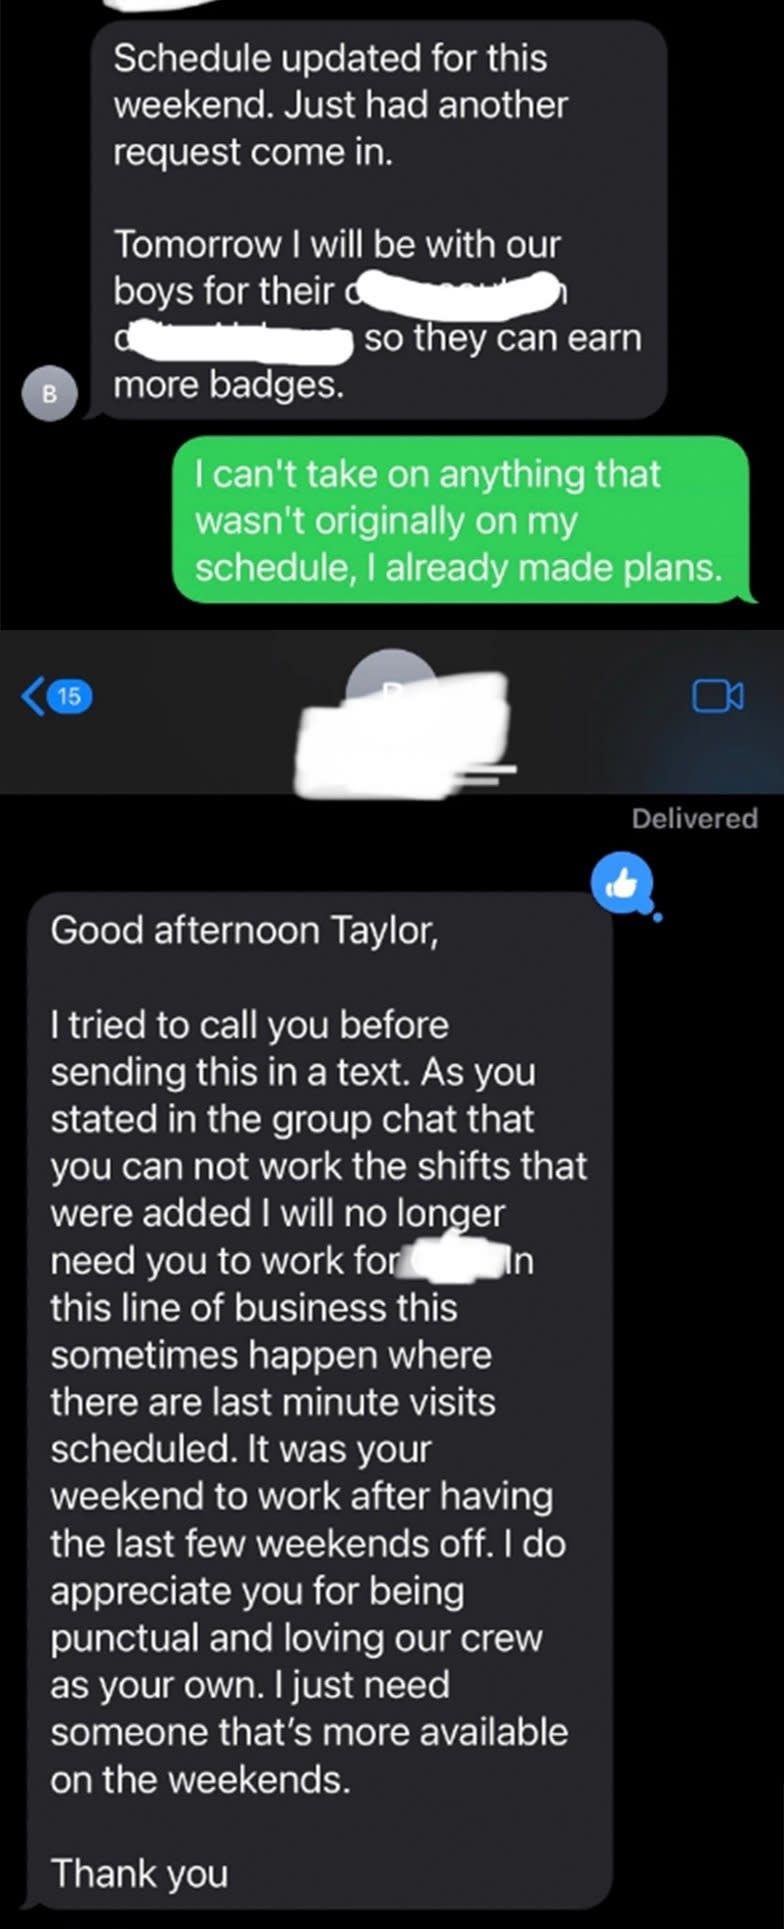 "Good afternoon Taylor"